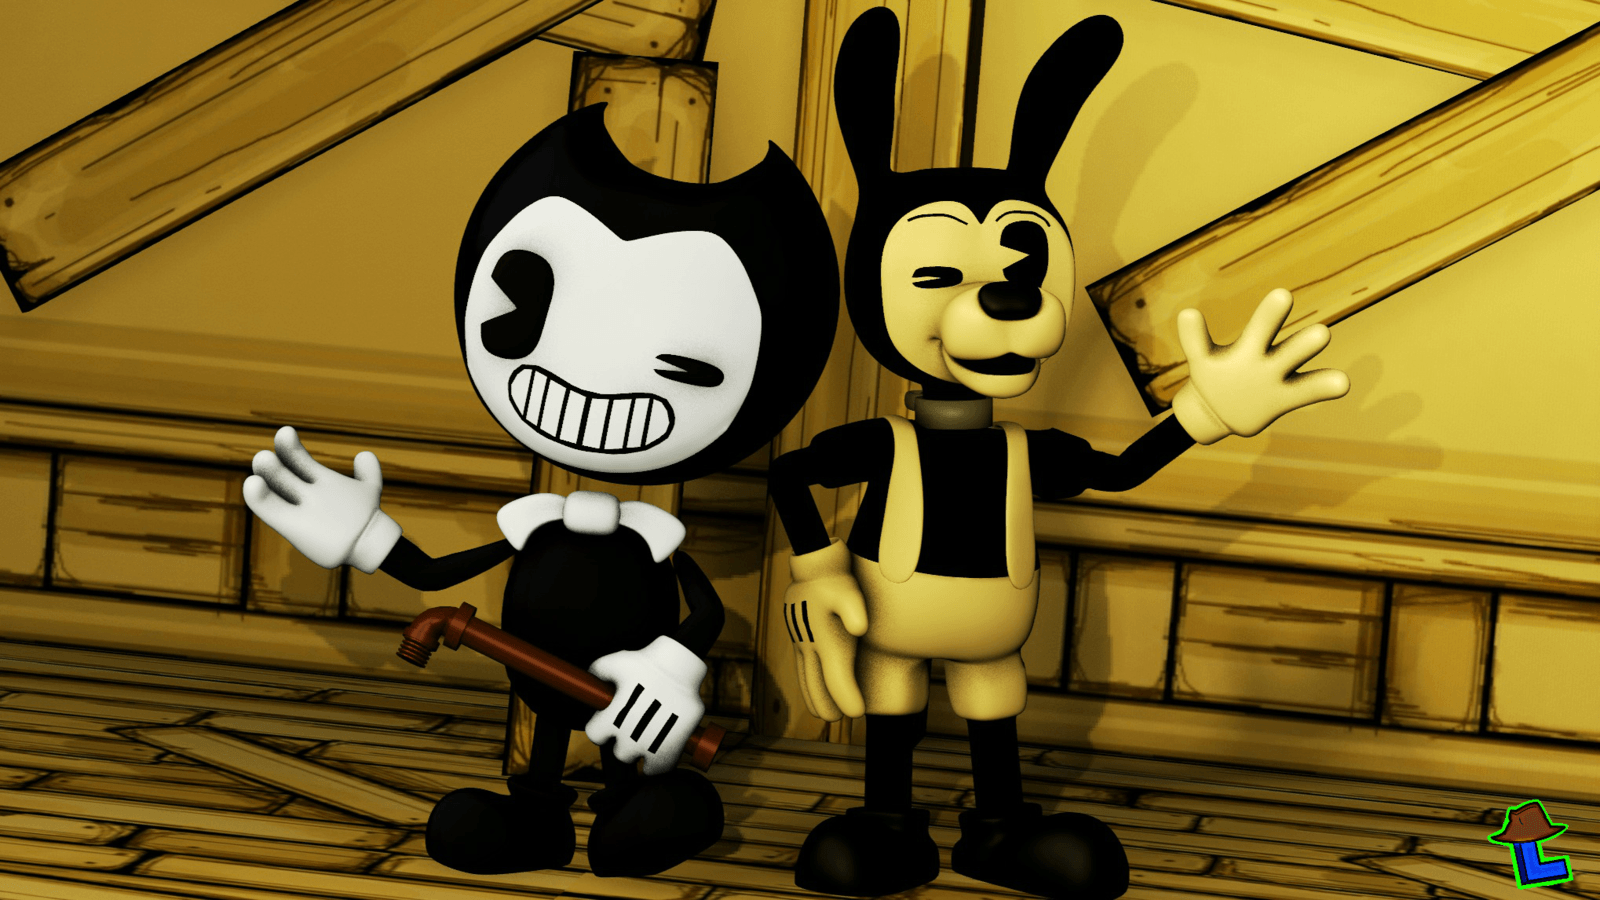 Bendy and Boris Bendy and the Ink machine